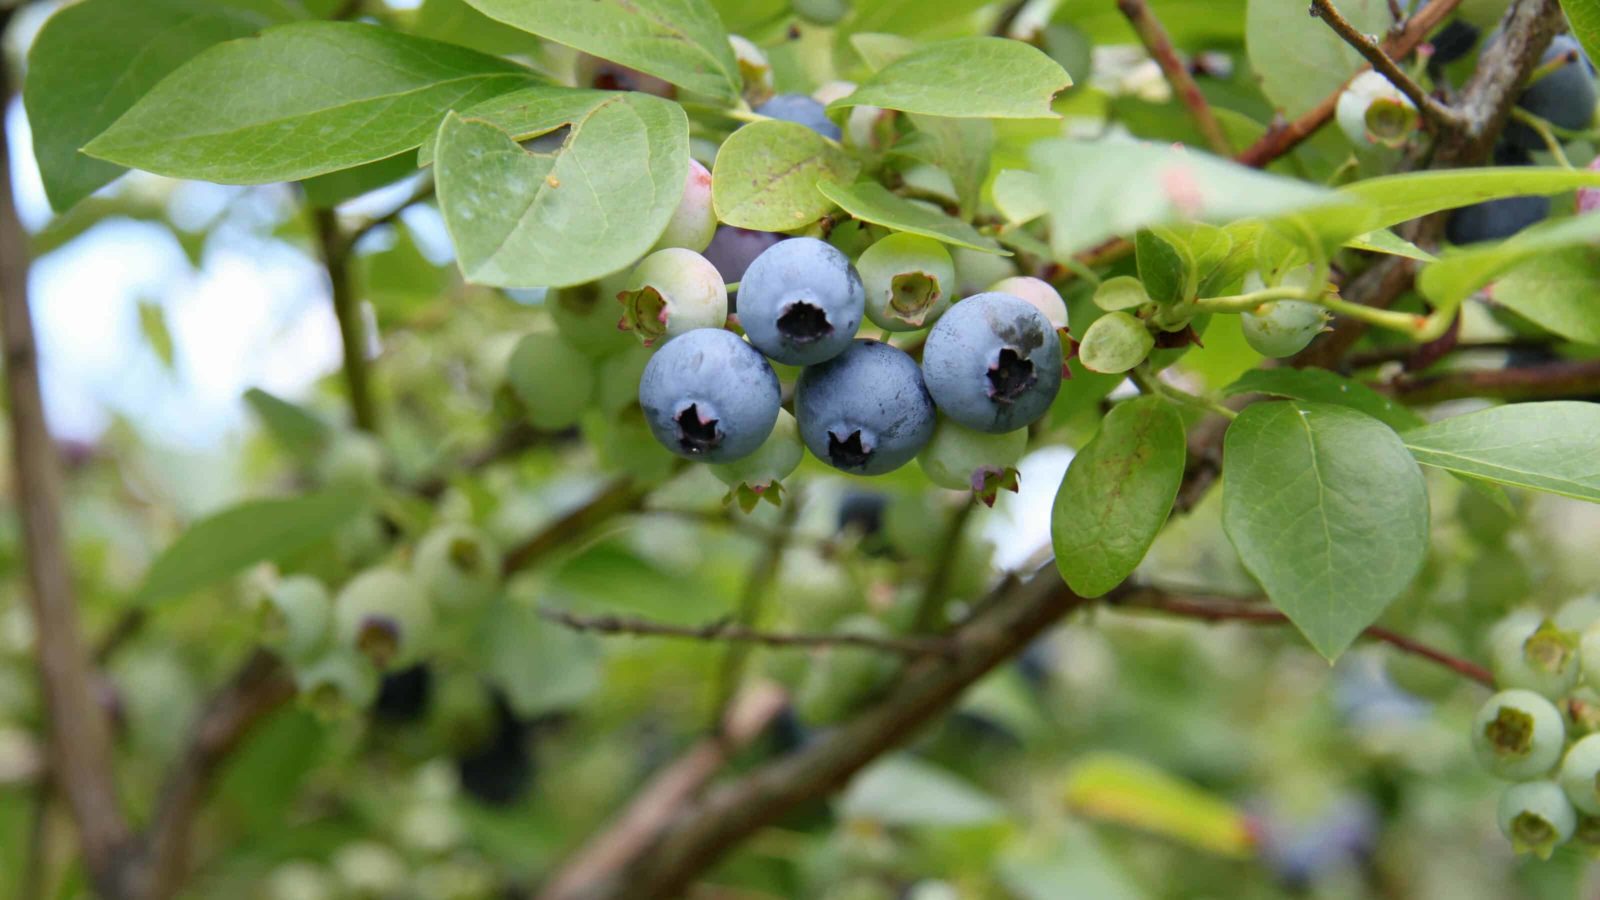 Pick-your-own blueberries ripen in Washington, Mass.